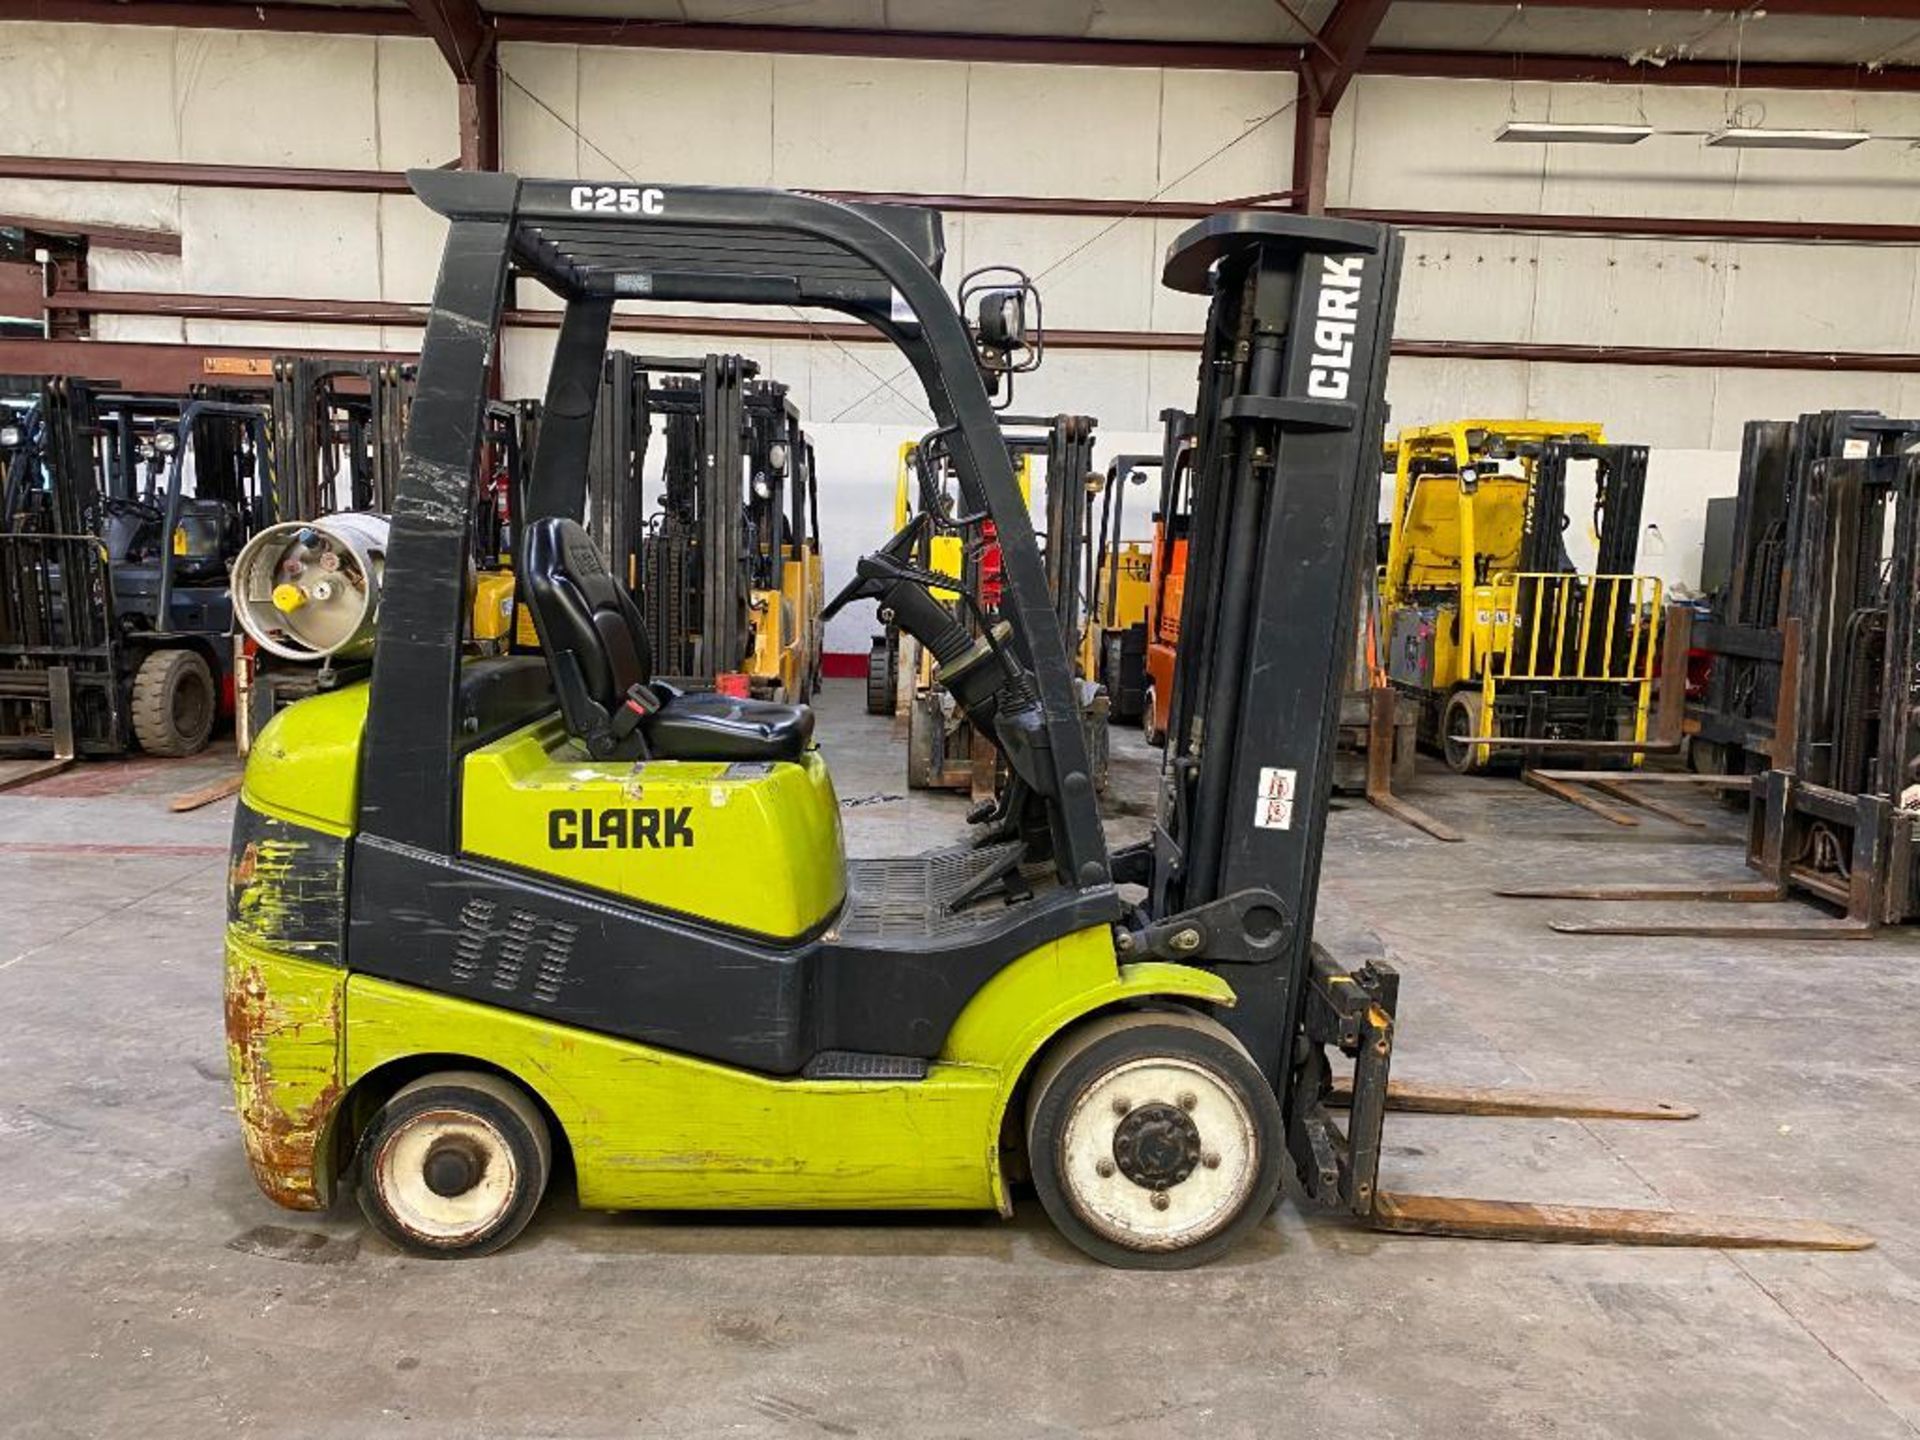 Clark 5,000-LB. Capacity Forklift, Model C25CL, S/N C232-0559-9592KF, LPG, Cushion Tires, 3-Stage Ma - Image 3 of 5